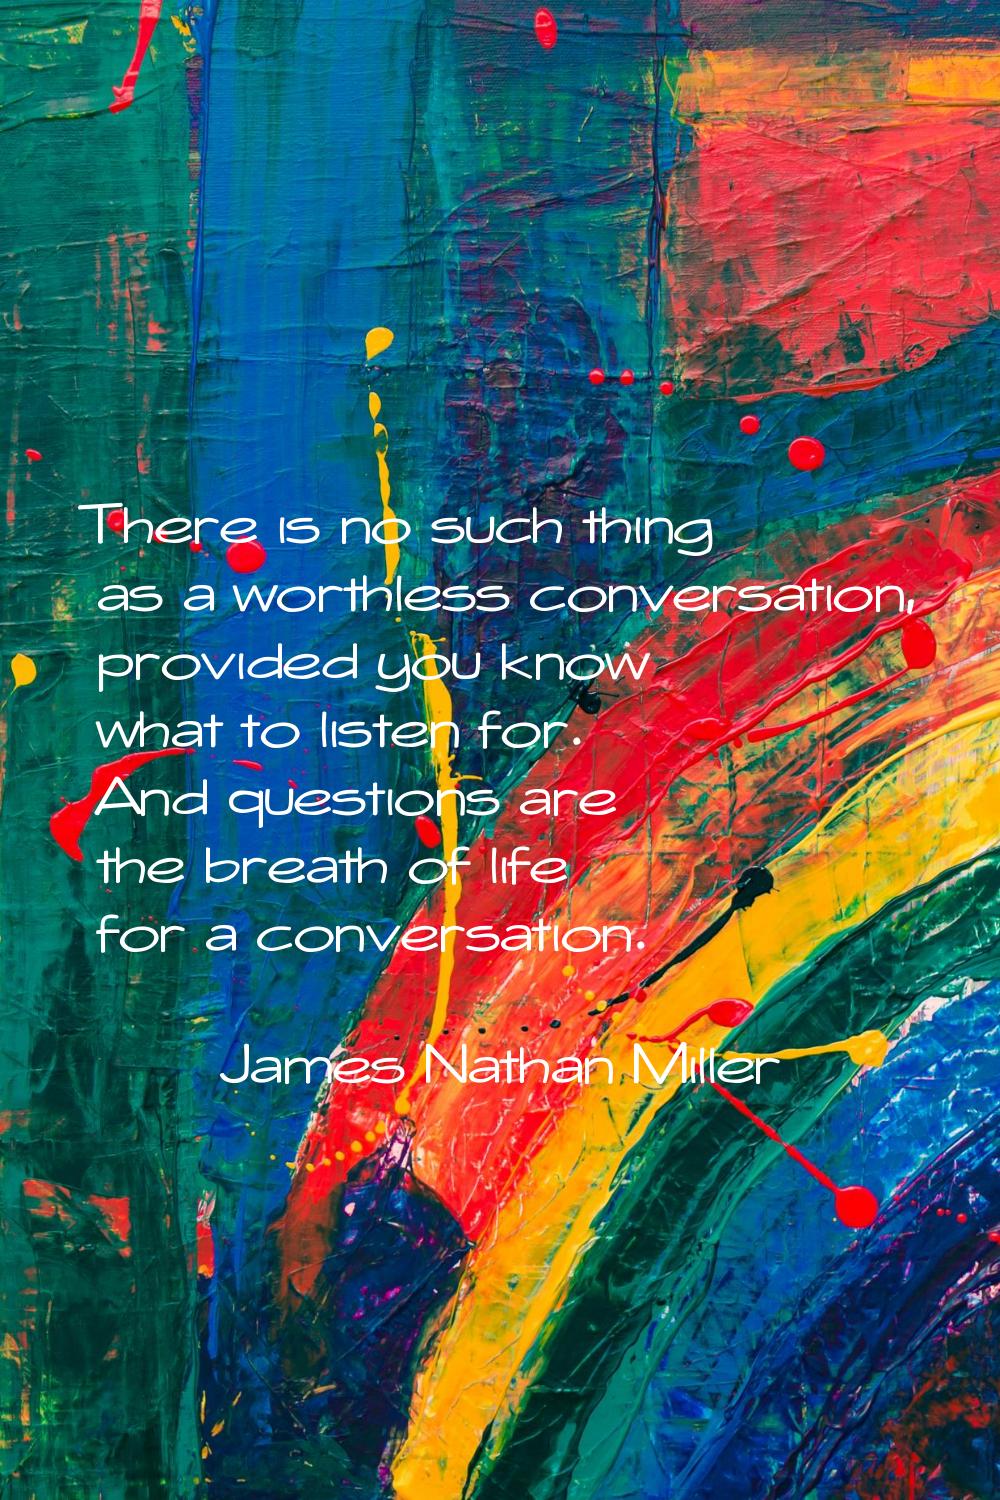 There is no such thing as a worthless conversation, provided you know what to listen for. And quest